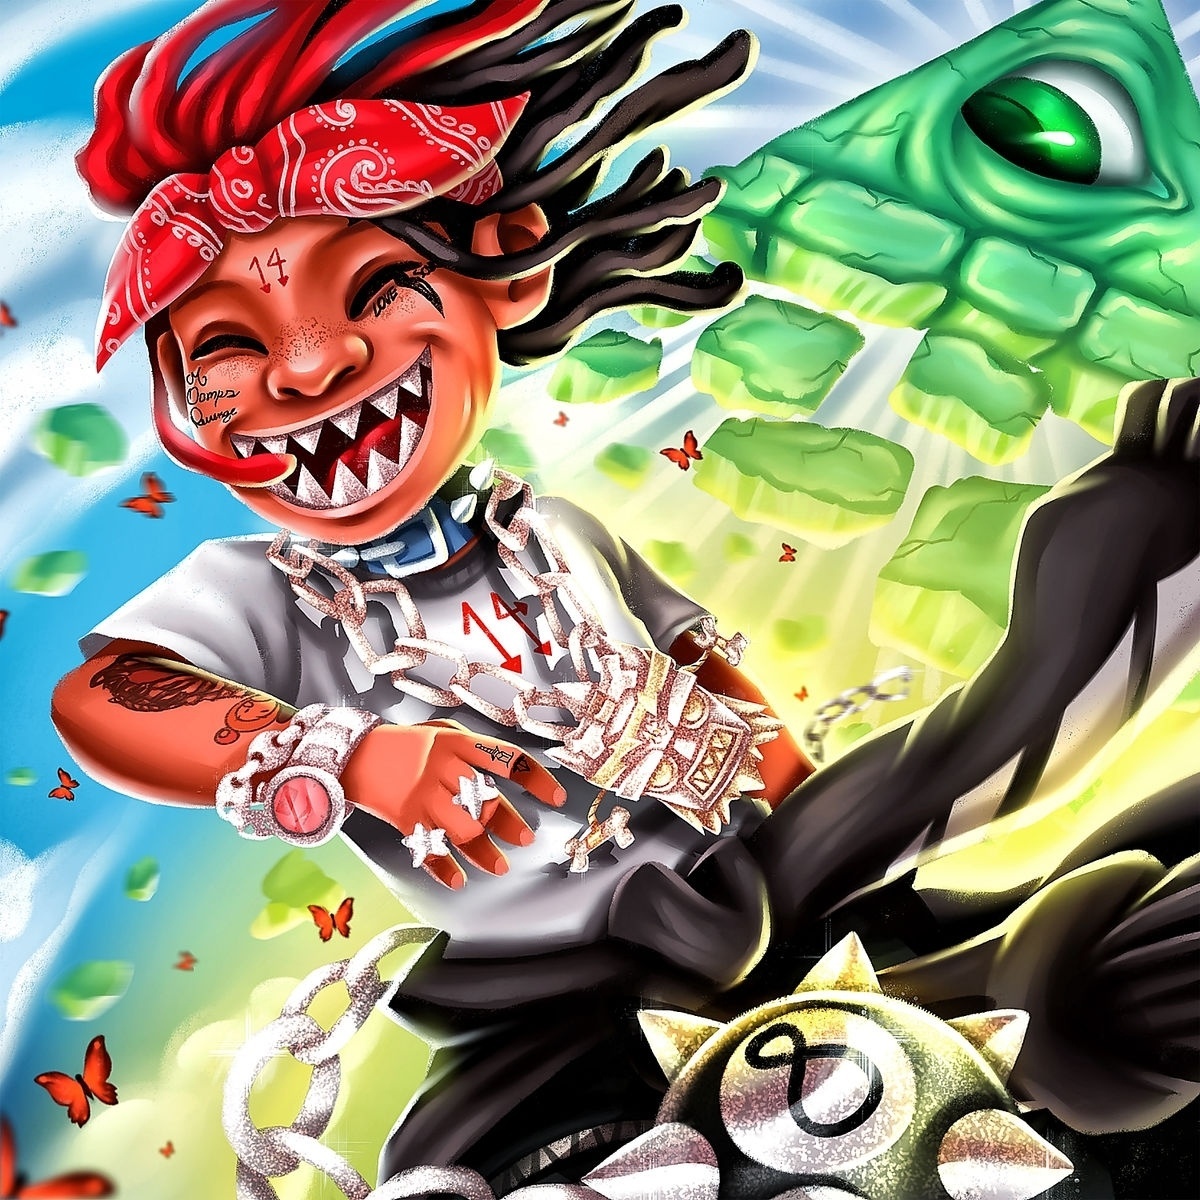 A Love Letter To You 3 - Trippie Redd. (CD)